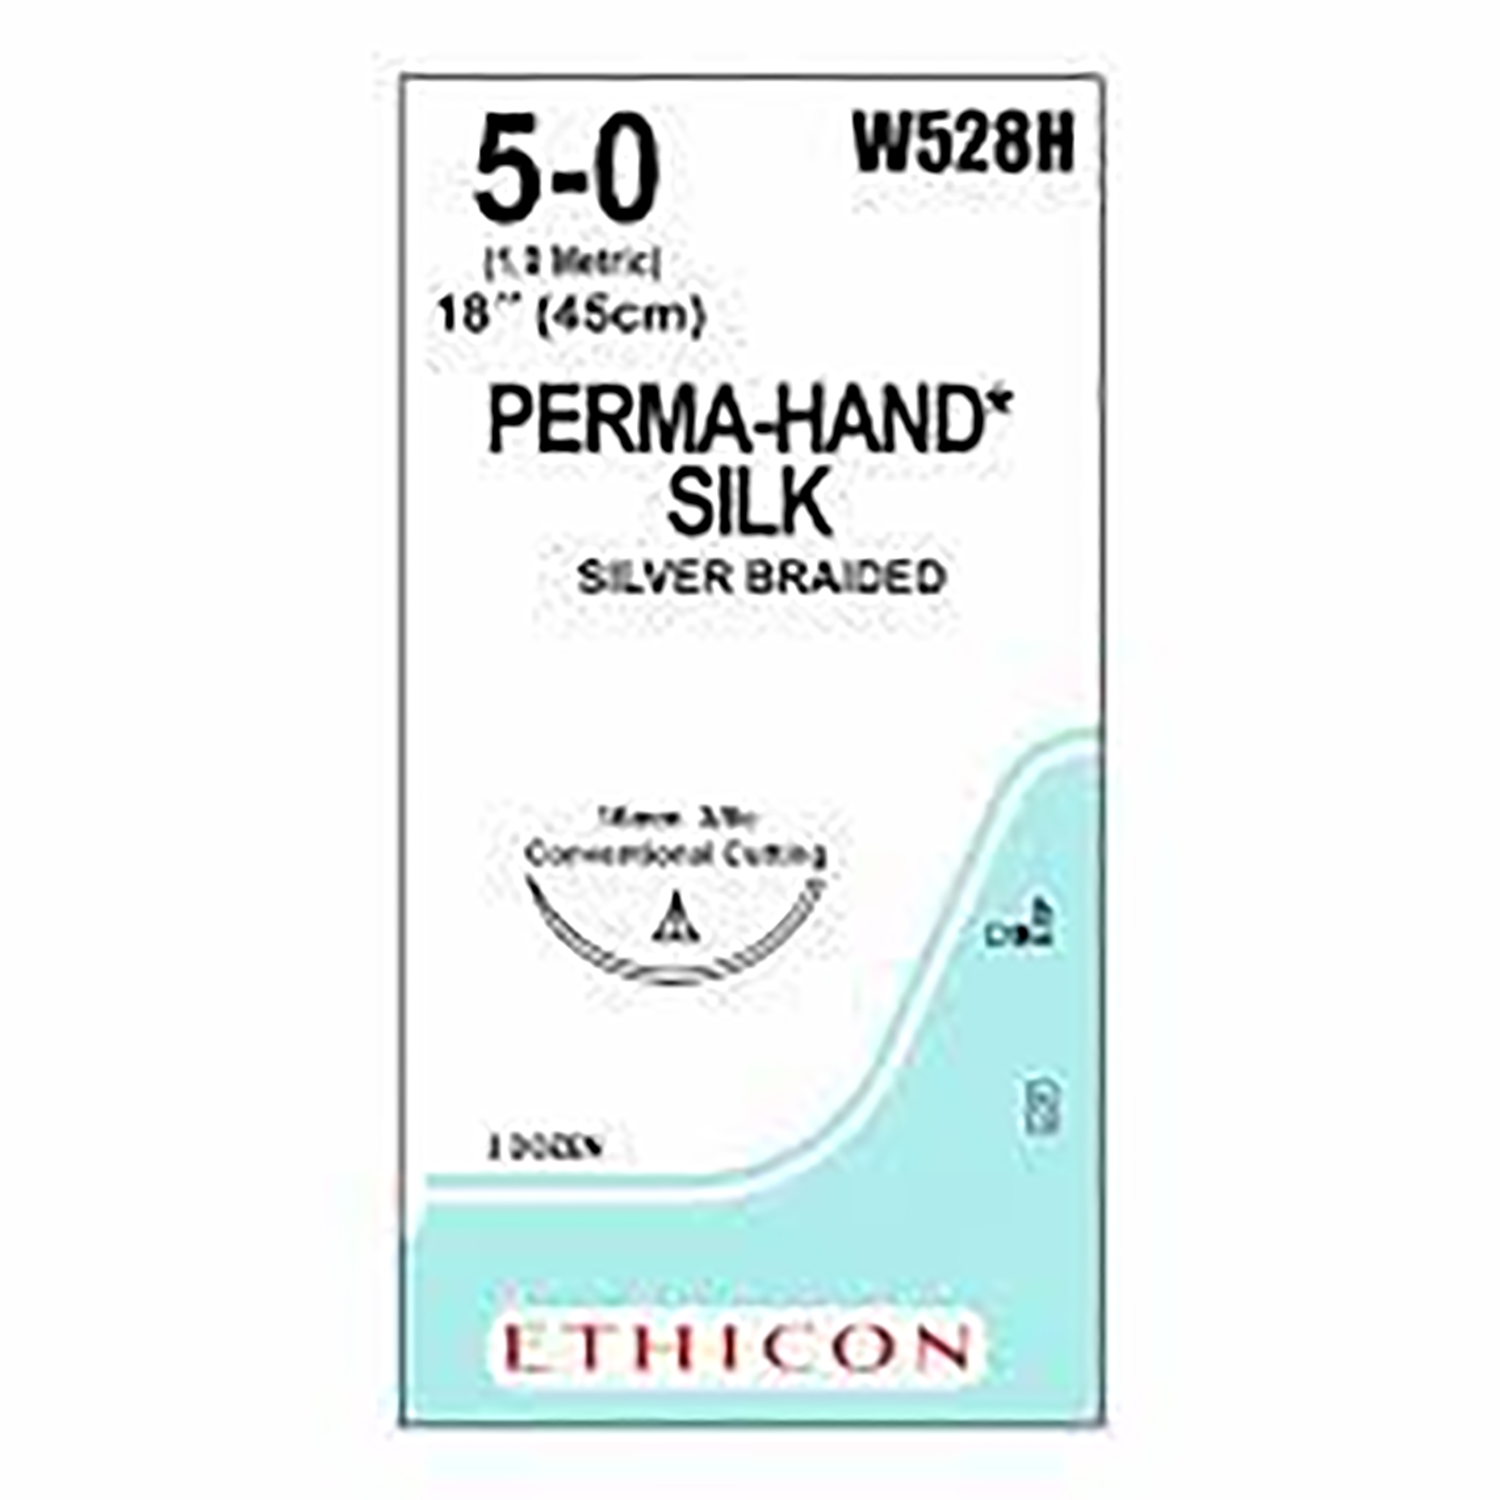 PERMAHAND Silk Suture | Non Absorbable | Silver | Suture Size: 5-0 | Length: 45cm | Pack of 36